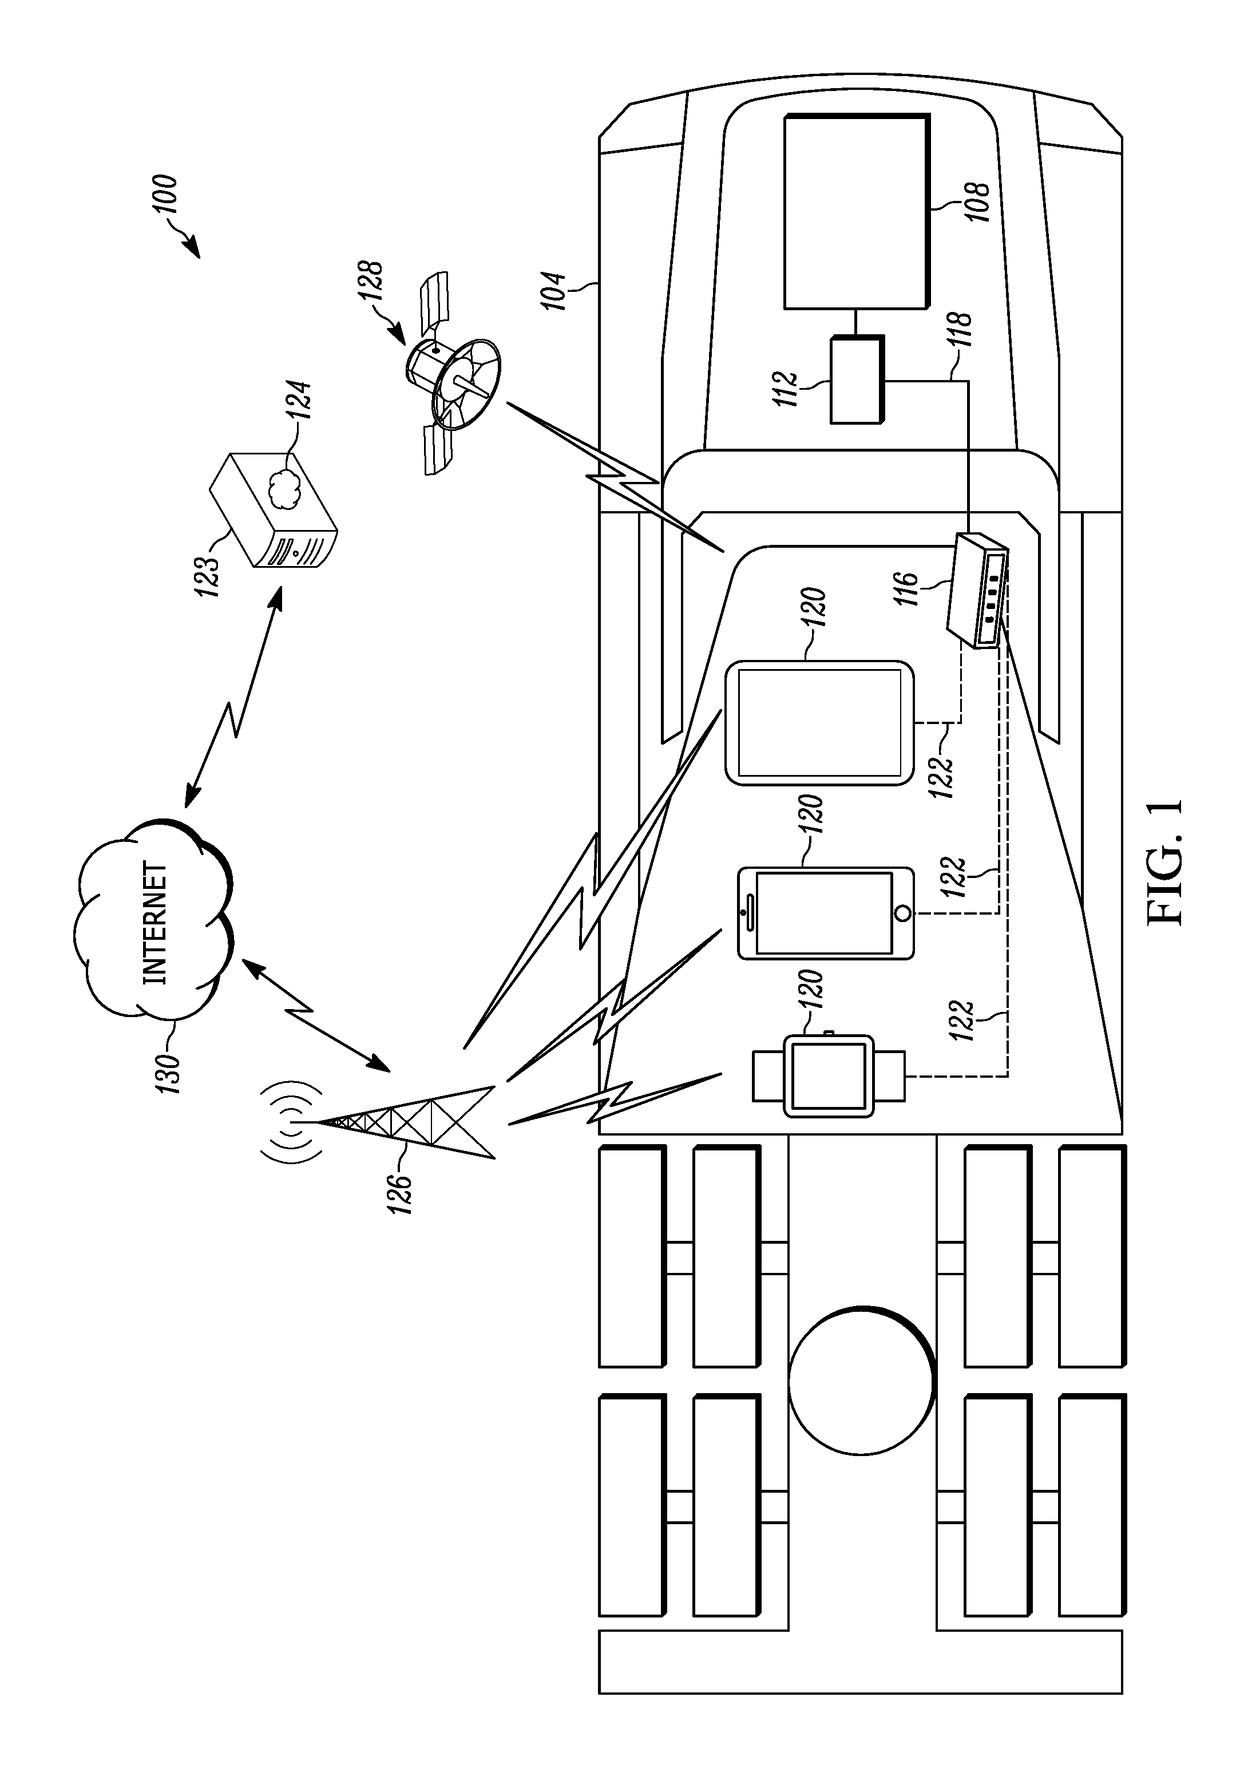 Method and system for authenticating a driver for driver compliance